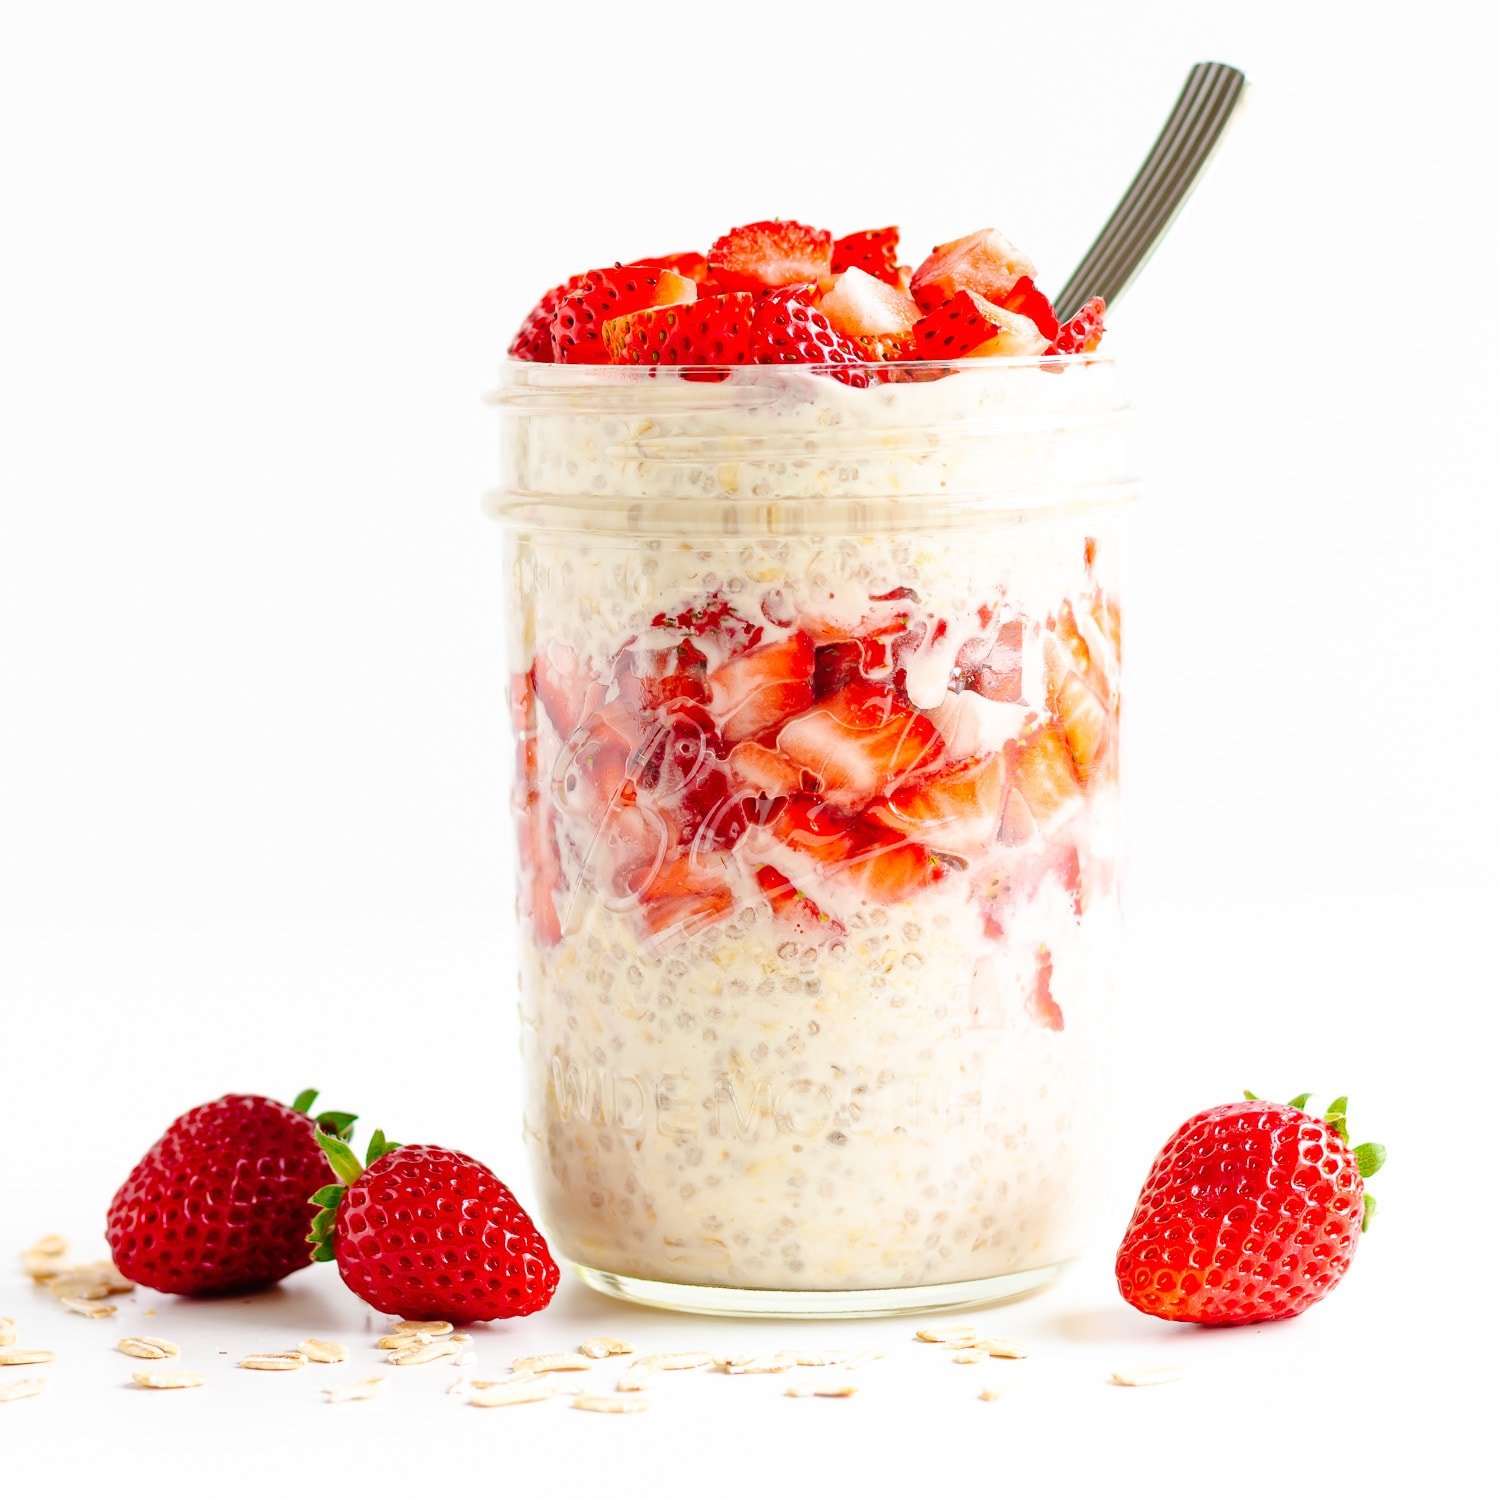 Jar containing layers of overnight oats and chopped strawberries with some whole strawberries and rolled oats scattered around it.